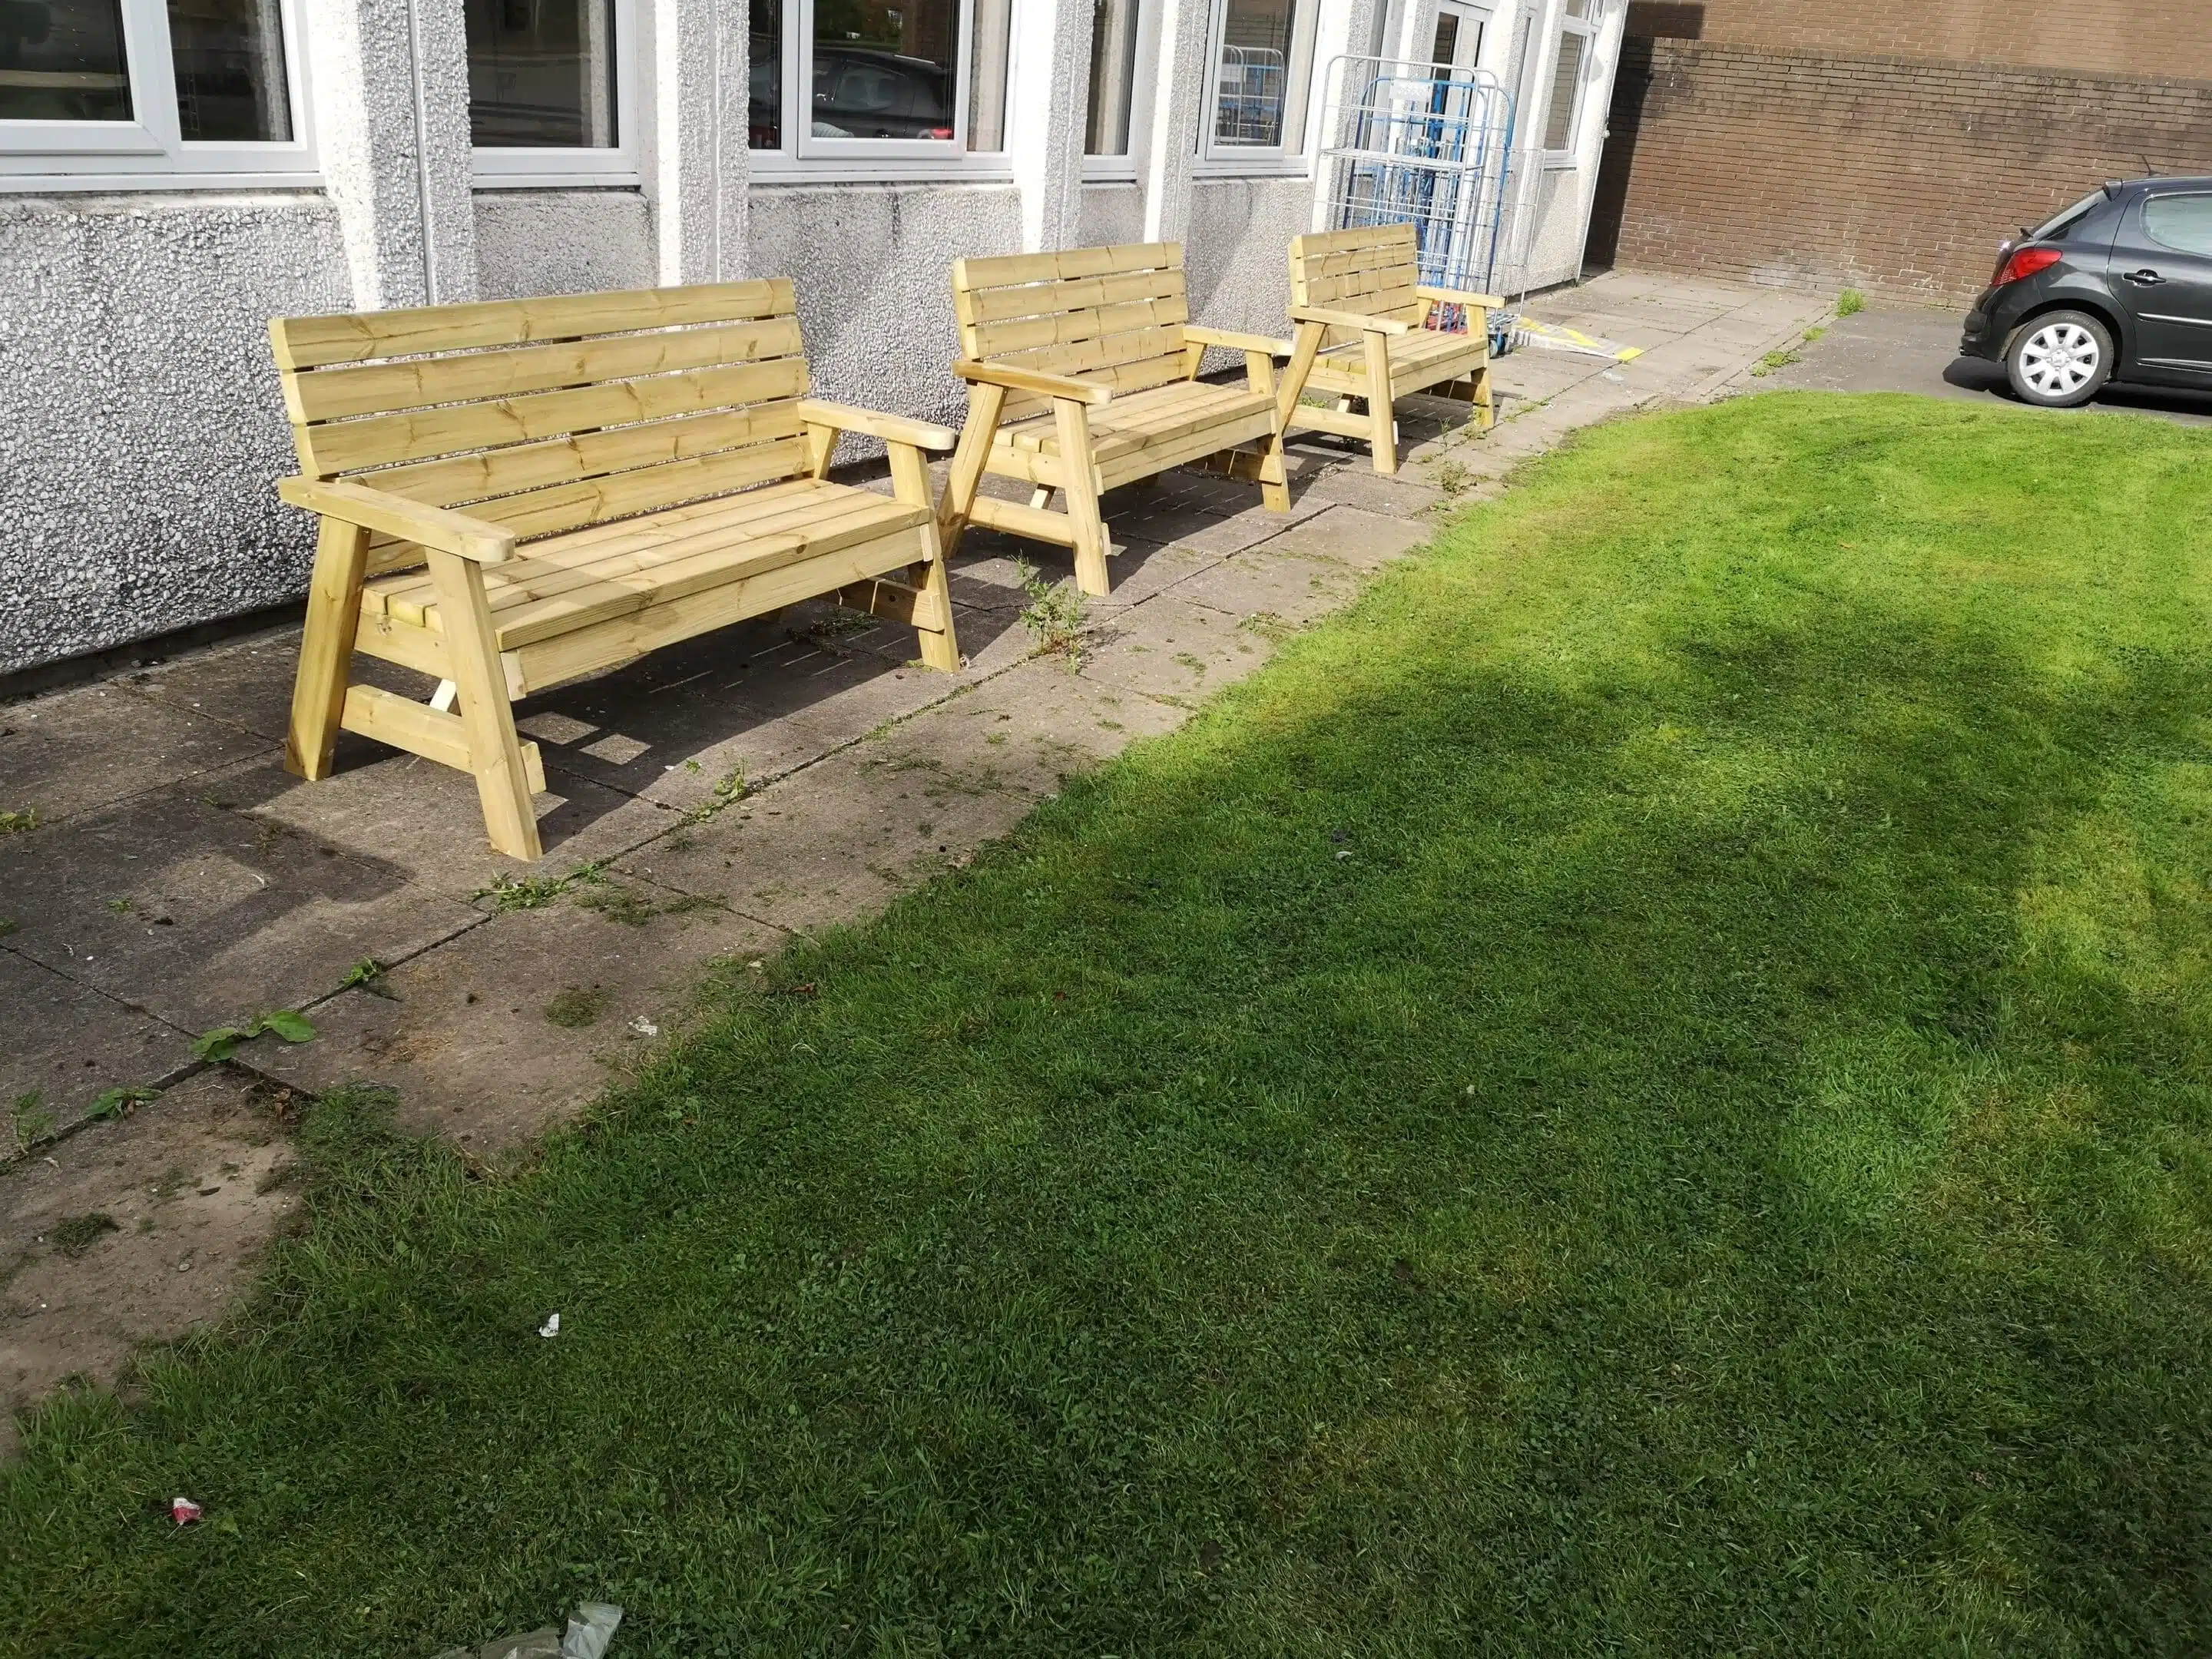 three wooden benches in front of a grass lawn